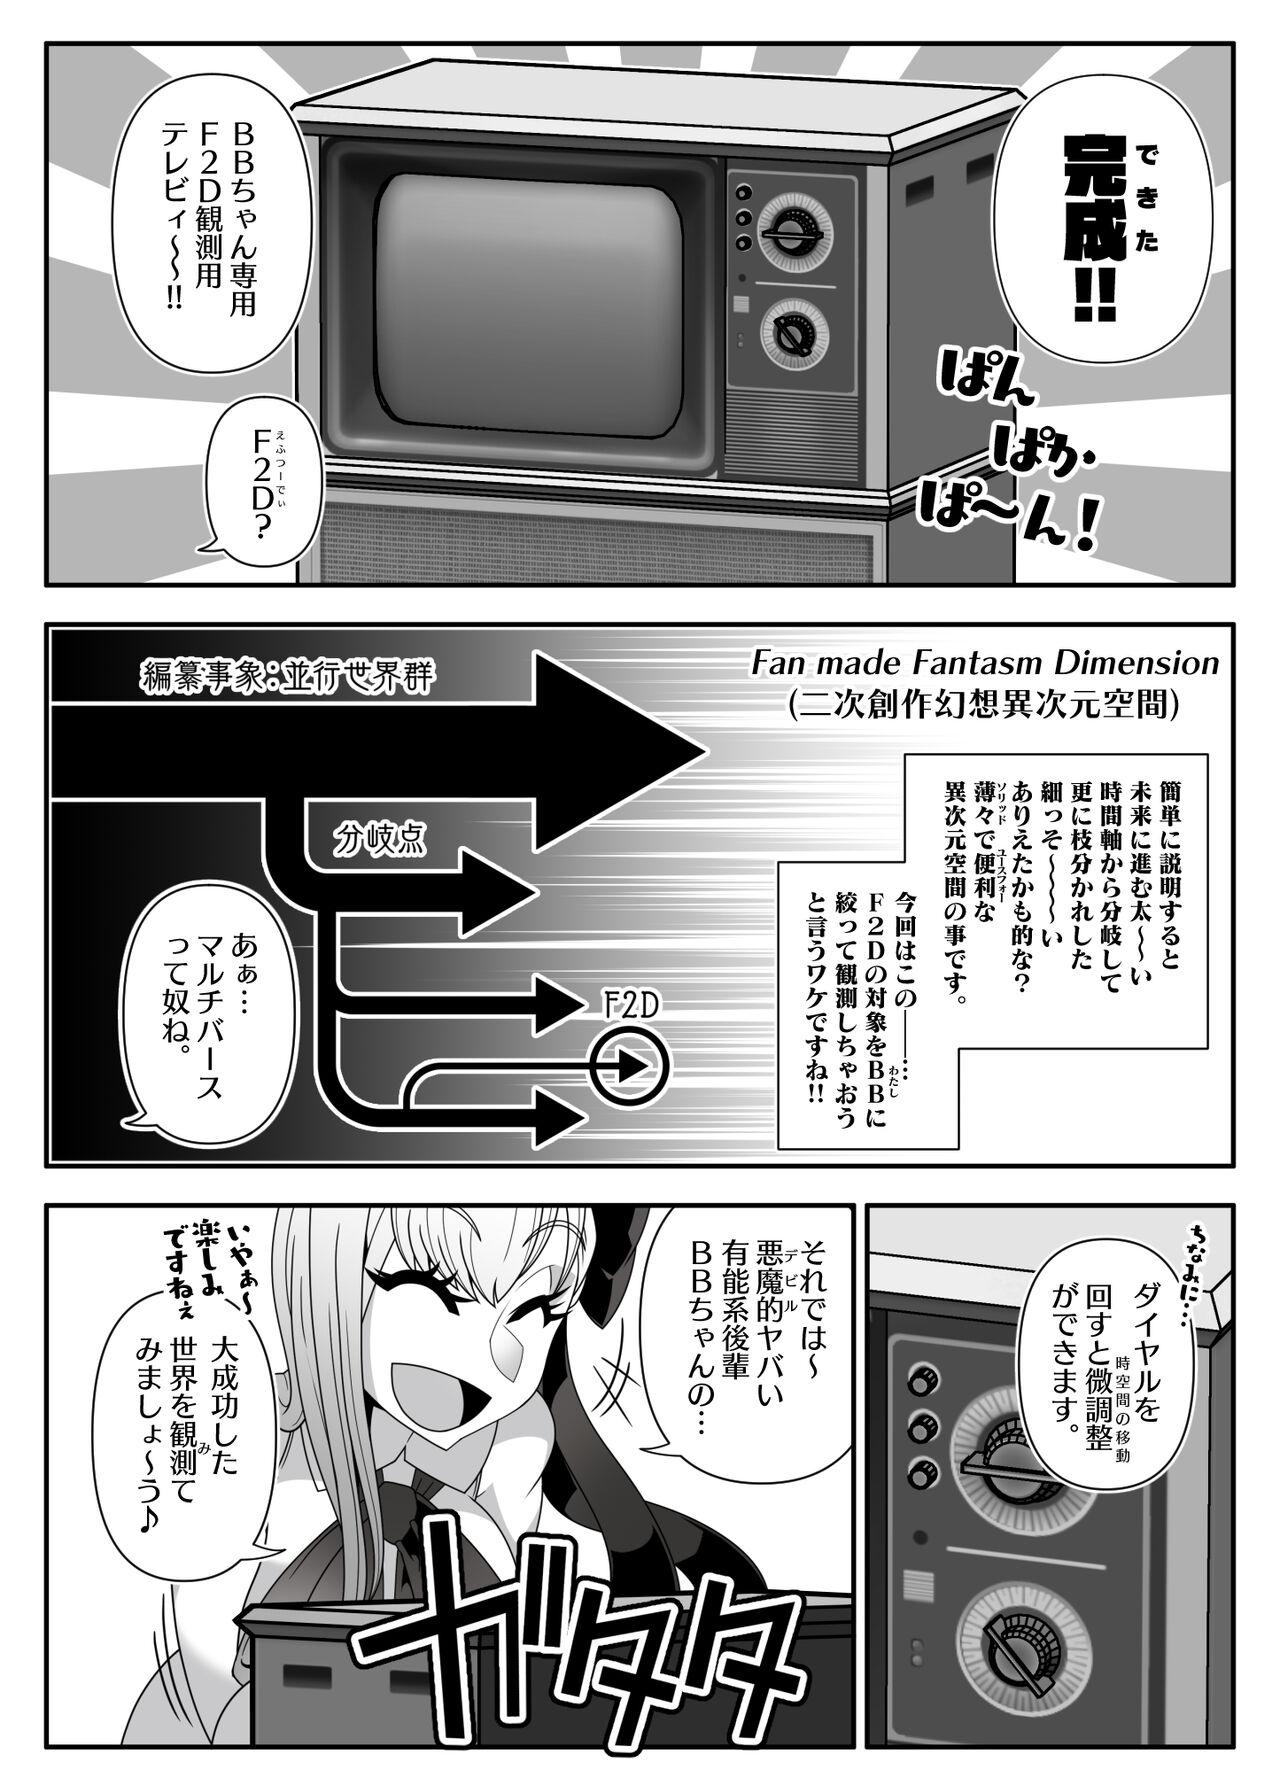 Busty F2D - Fate grand order Rough Sex - Page 5